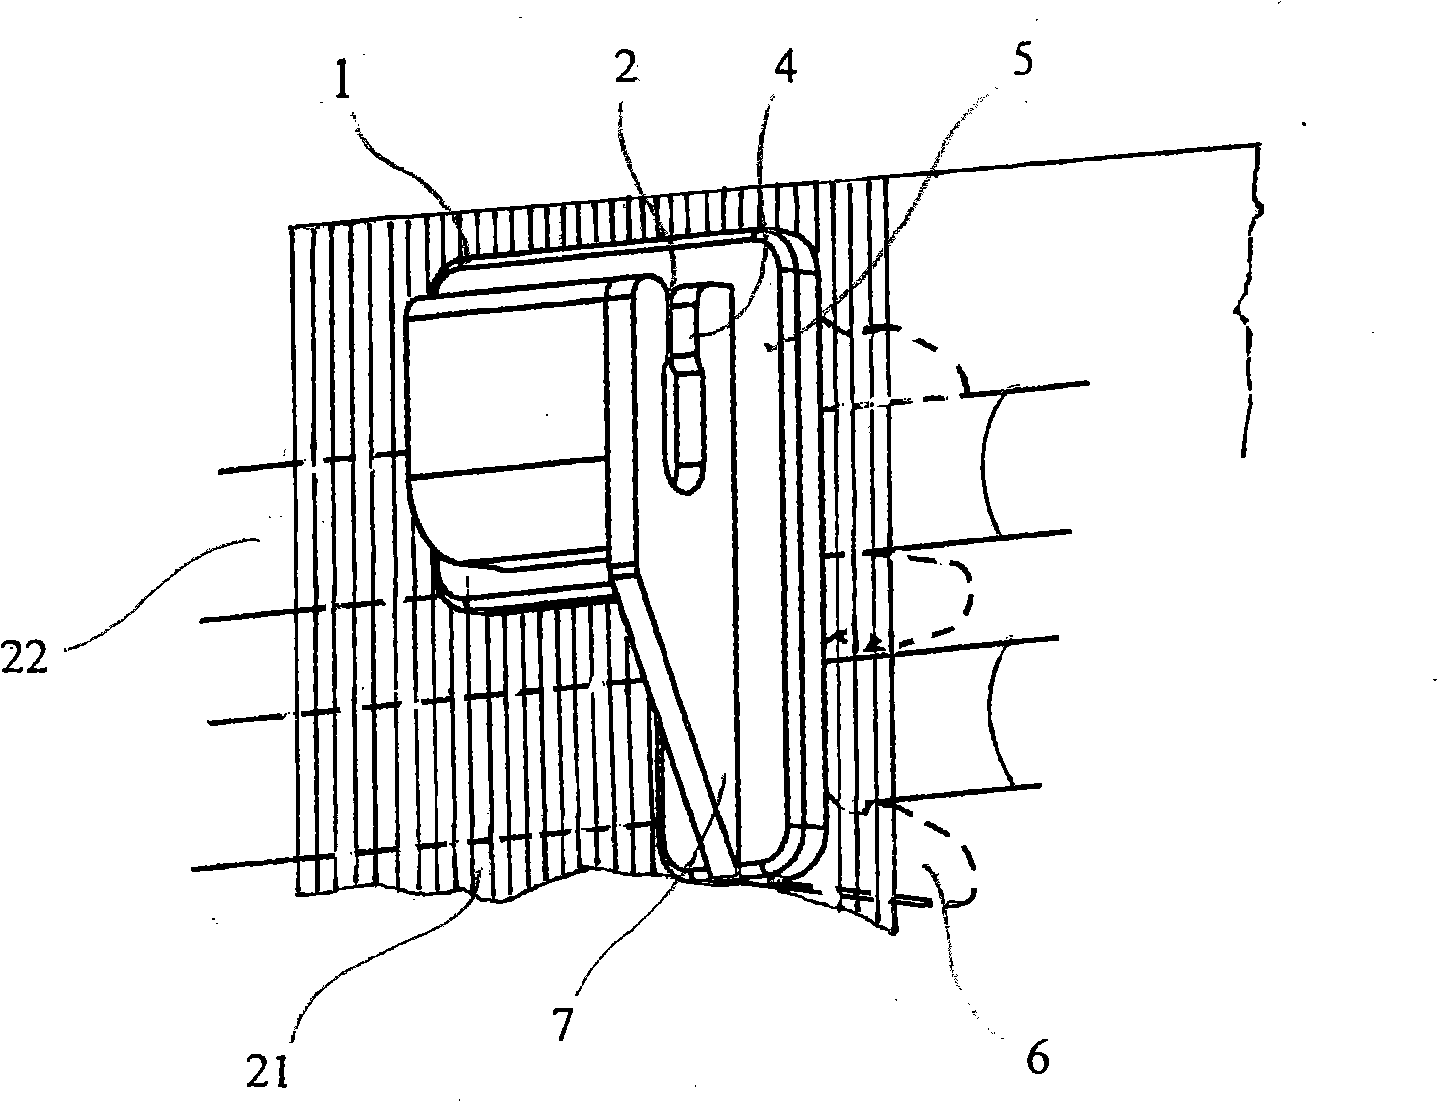 Temperature sensor fixing structure for outdoor set of air-conditioner